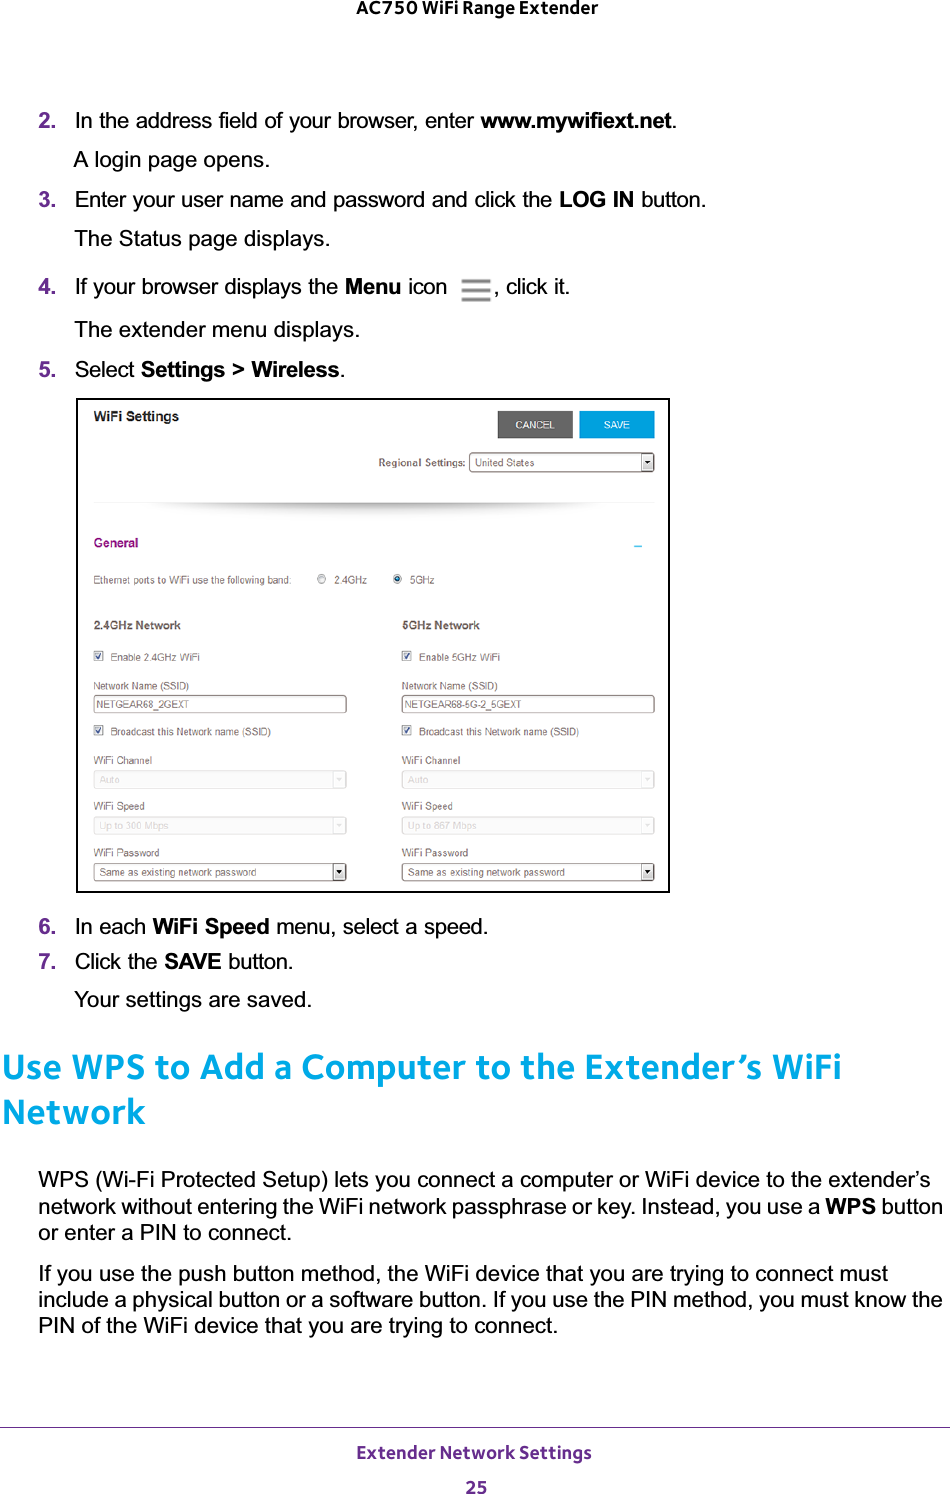 Extender Network Settings 25 AC750 WiFi Range Extender2.  In the address field of your browser, enter www.mywifiext.net. A login page opens.3.  Enter your user name and password and click the LOG IN button.The Status page displays.4.  If your browser displays the Menu icon  , click it.The extender menu displays.5.  Select Settings &gt; Wireless.6.  In each WiFi Speed menu, select a speed.7.  Click the SAVE button.Your settings are saved.Use WPS to Add a Computer to the Extender’s WiFi NetworkWPS (Wi-Fi Protected Setup) lets you connect a computer or WiFi device to the extender’s network without entering the WiFi network passphrase or key. Instead, you use a WPS button or enter a PIN to connect.If you use the push button method, the WiFi device that you are trying to connect must include a physical button or a software button. If you use the PIN method, you must know the PIN of the WiFi device that you are trying to connect.